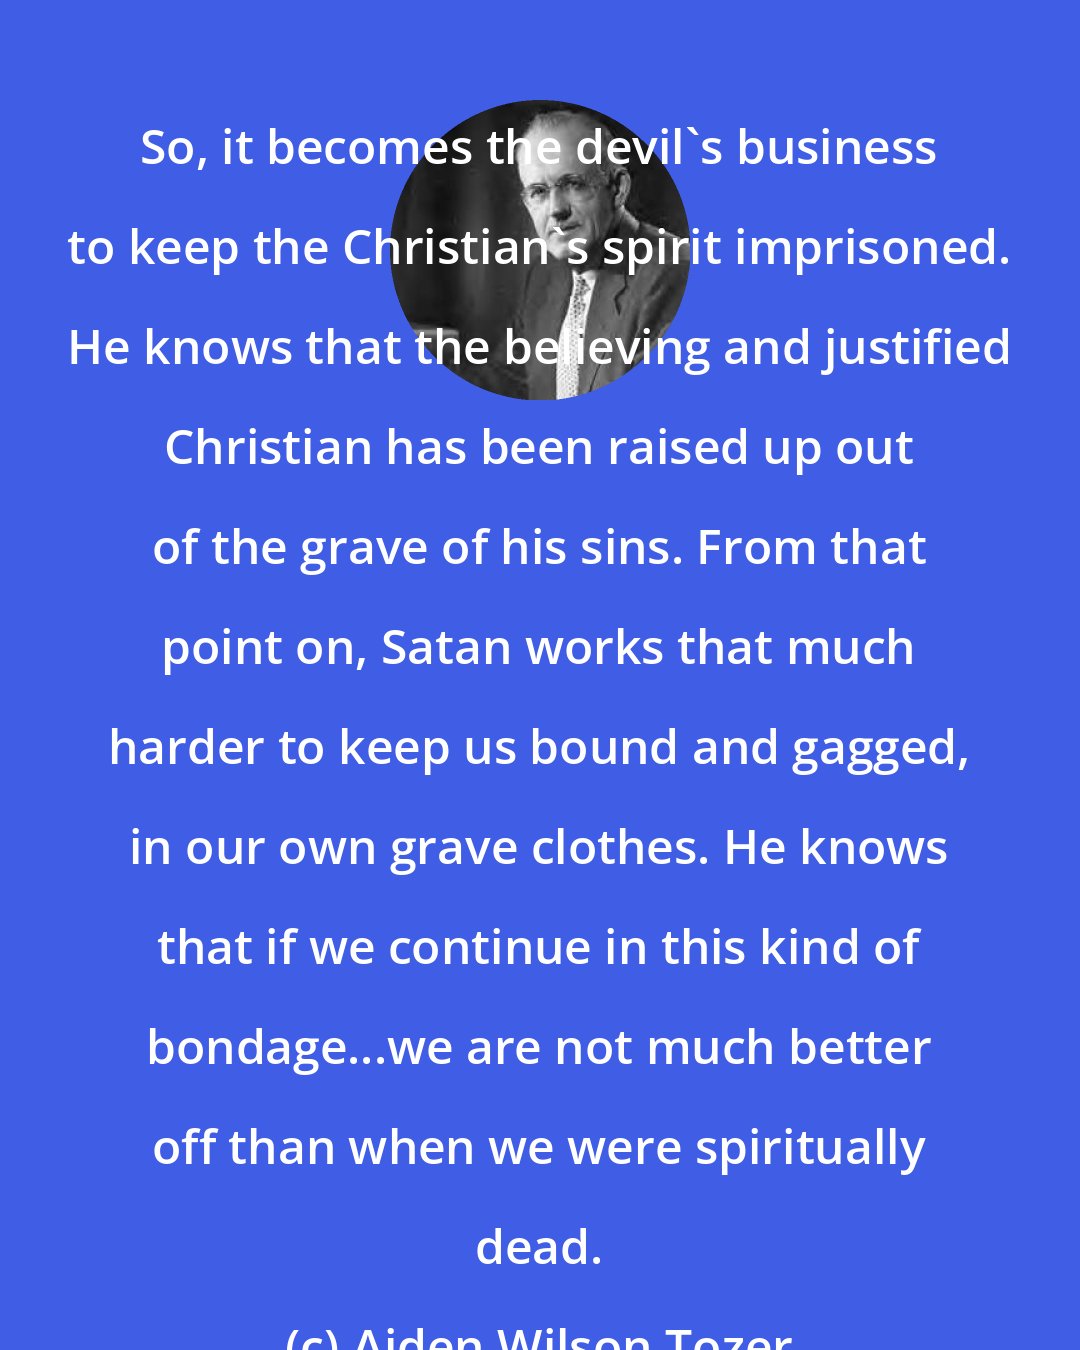 Aiden Wilson Tozer: So, it becomes the devil's business to keep the Christian's spirit imprisoned. He knows that the believing and justified Christian has been raised up out of the grave of his sins. From that point on, Satan works that much harder to keep us bound and gagged, in our own grave clothes. He knows that if we continue in this kind of bondage...we are not much better off than when we were spiritually dead.